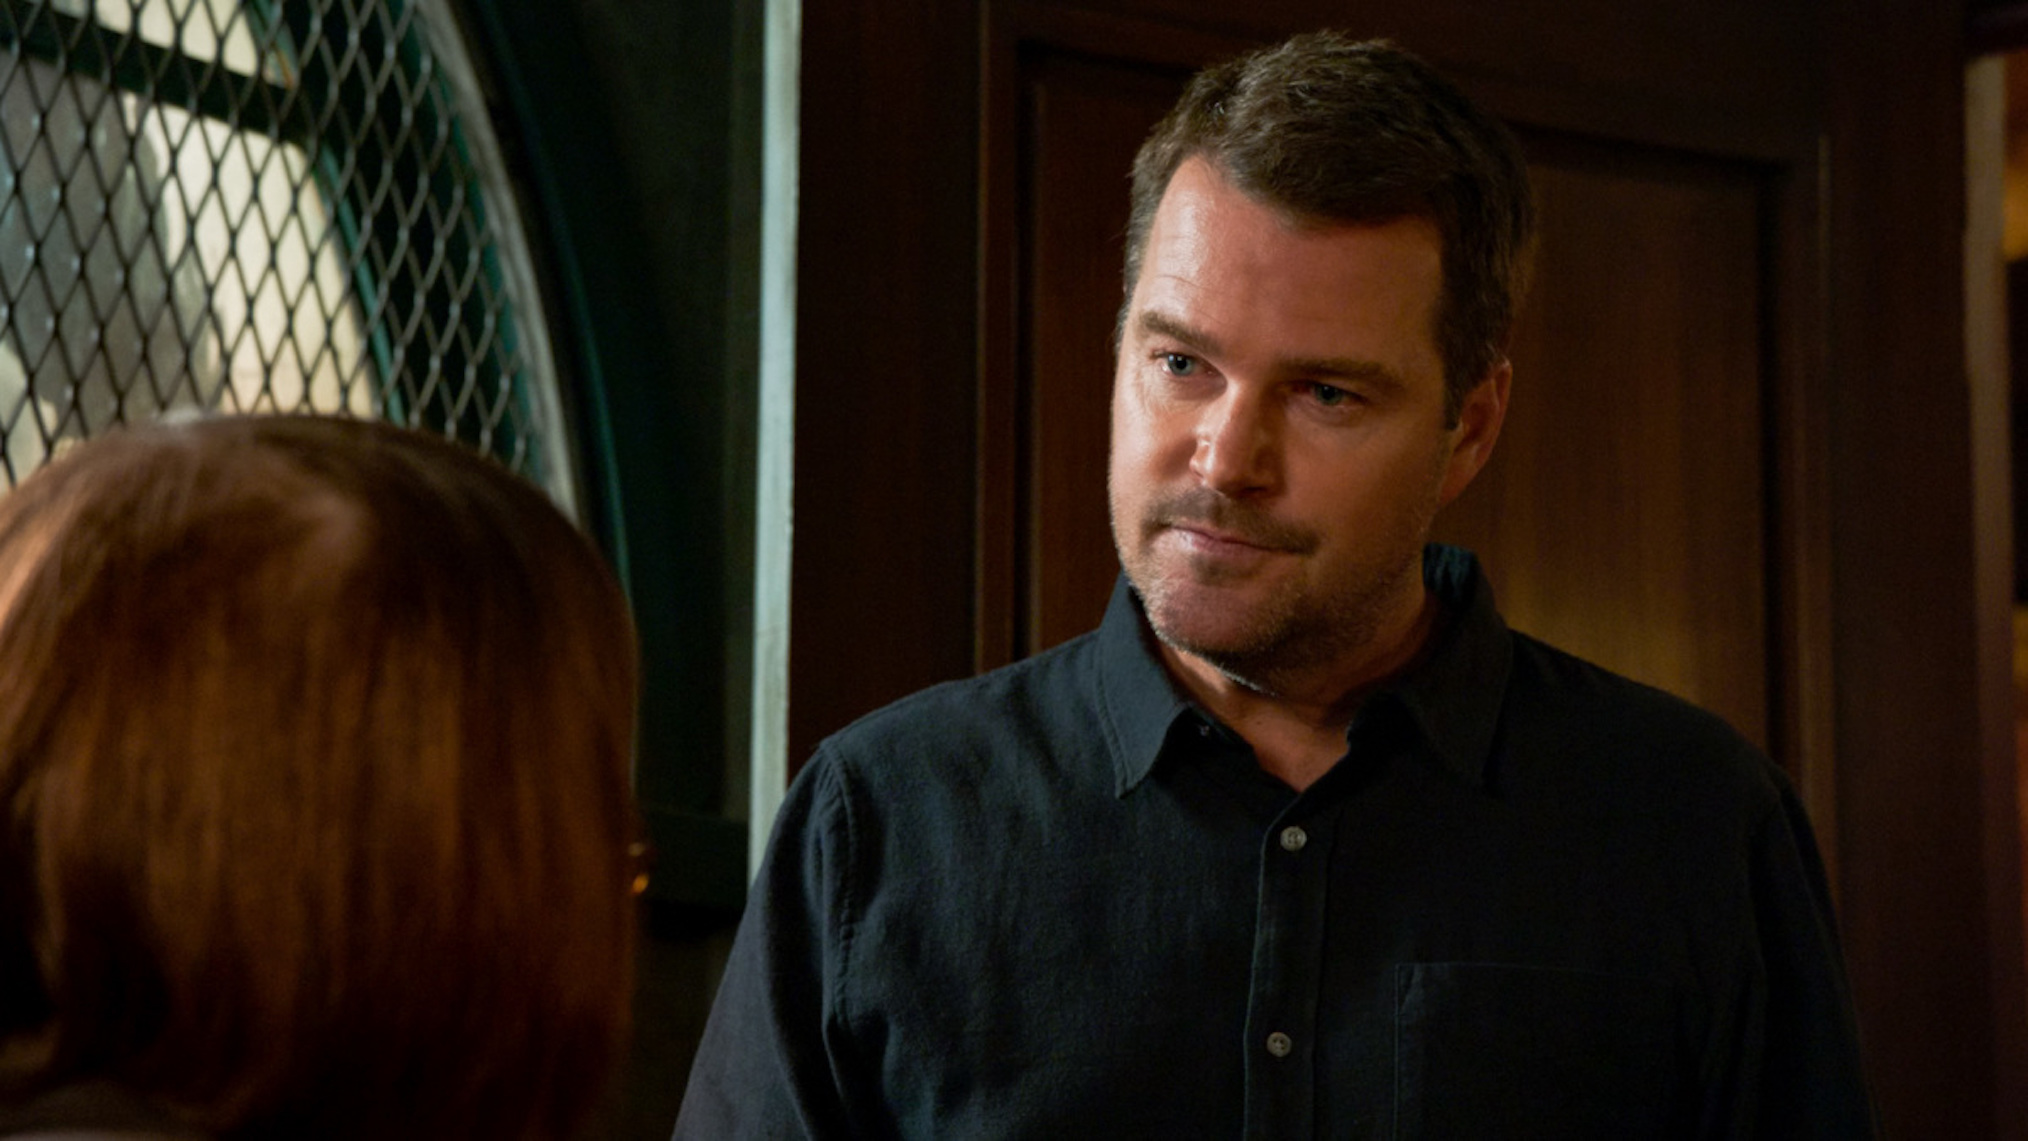 Chris O'Donnell as Callen in NCIS LA